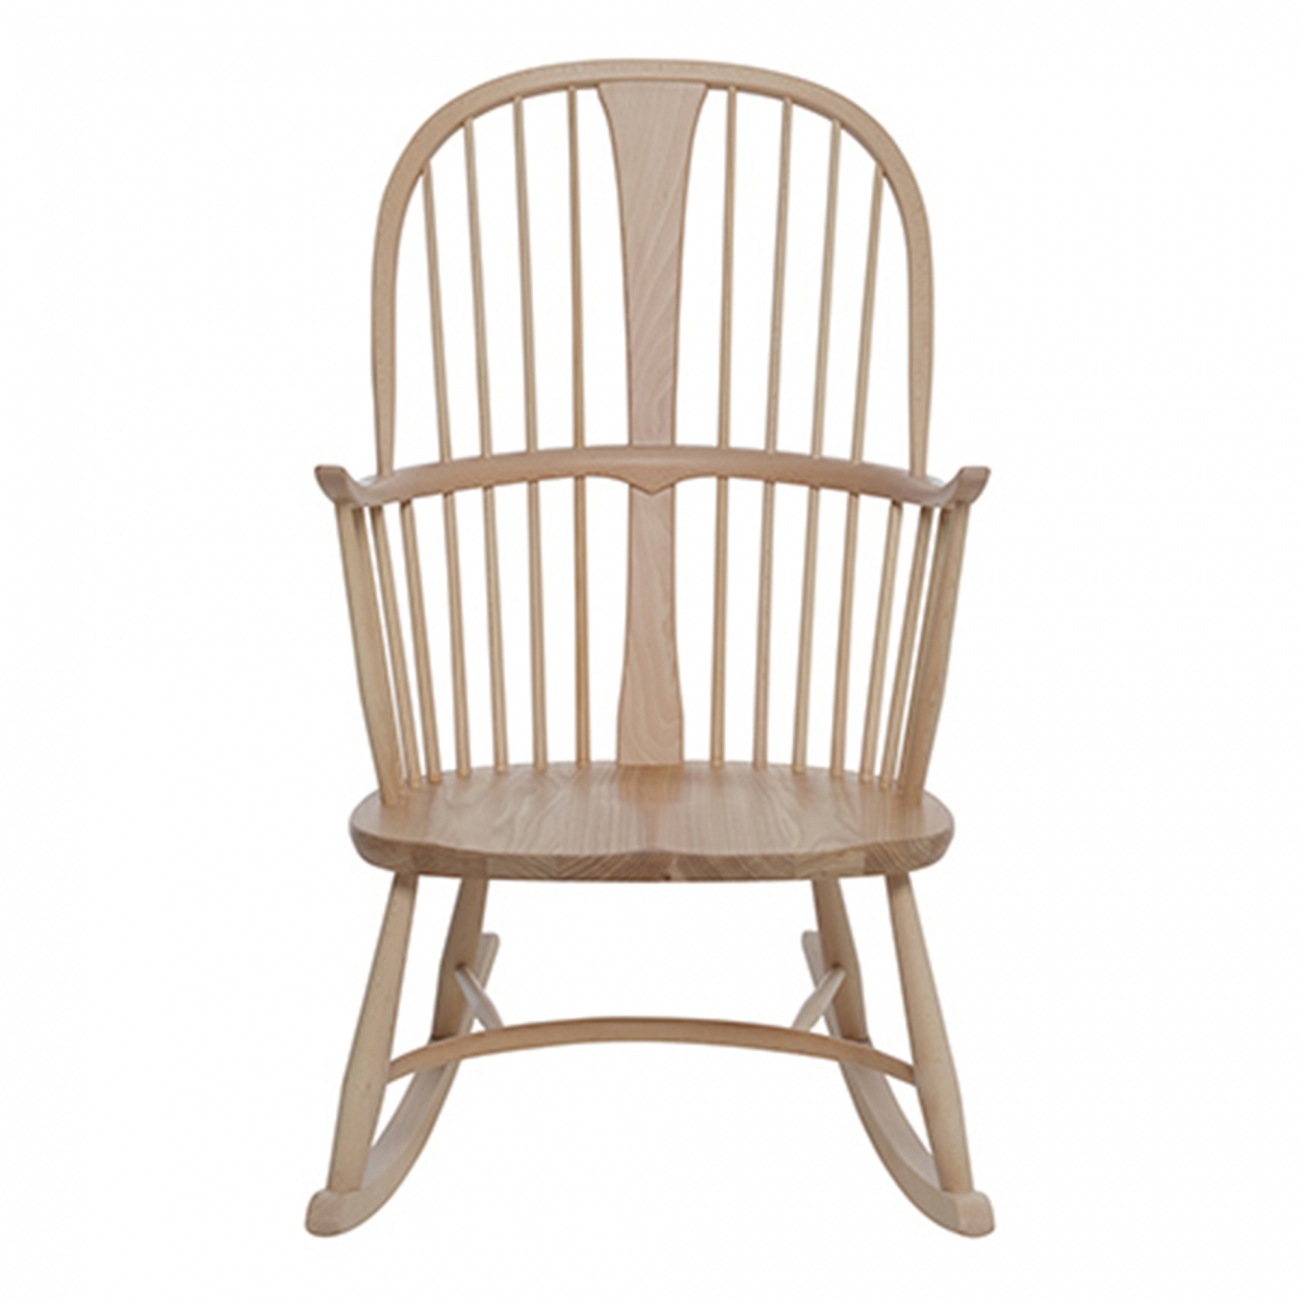 Ercol Chairmakers Rocking Chair